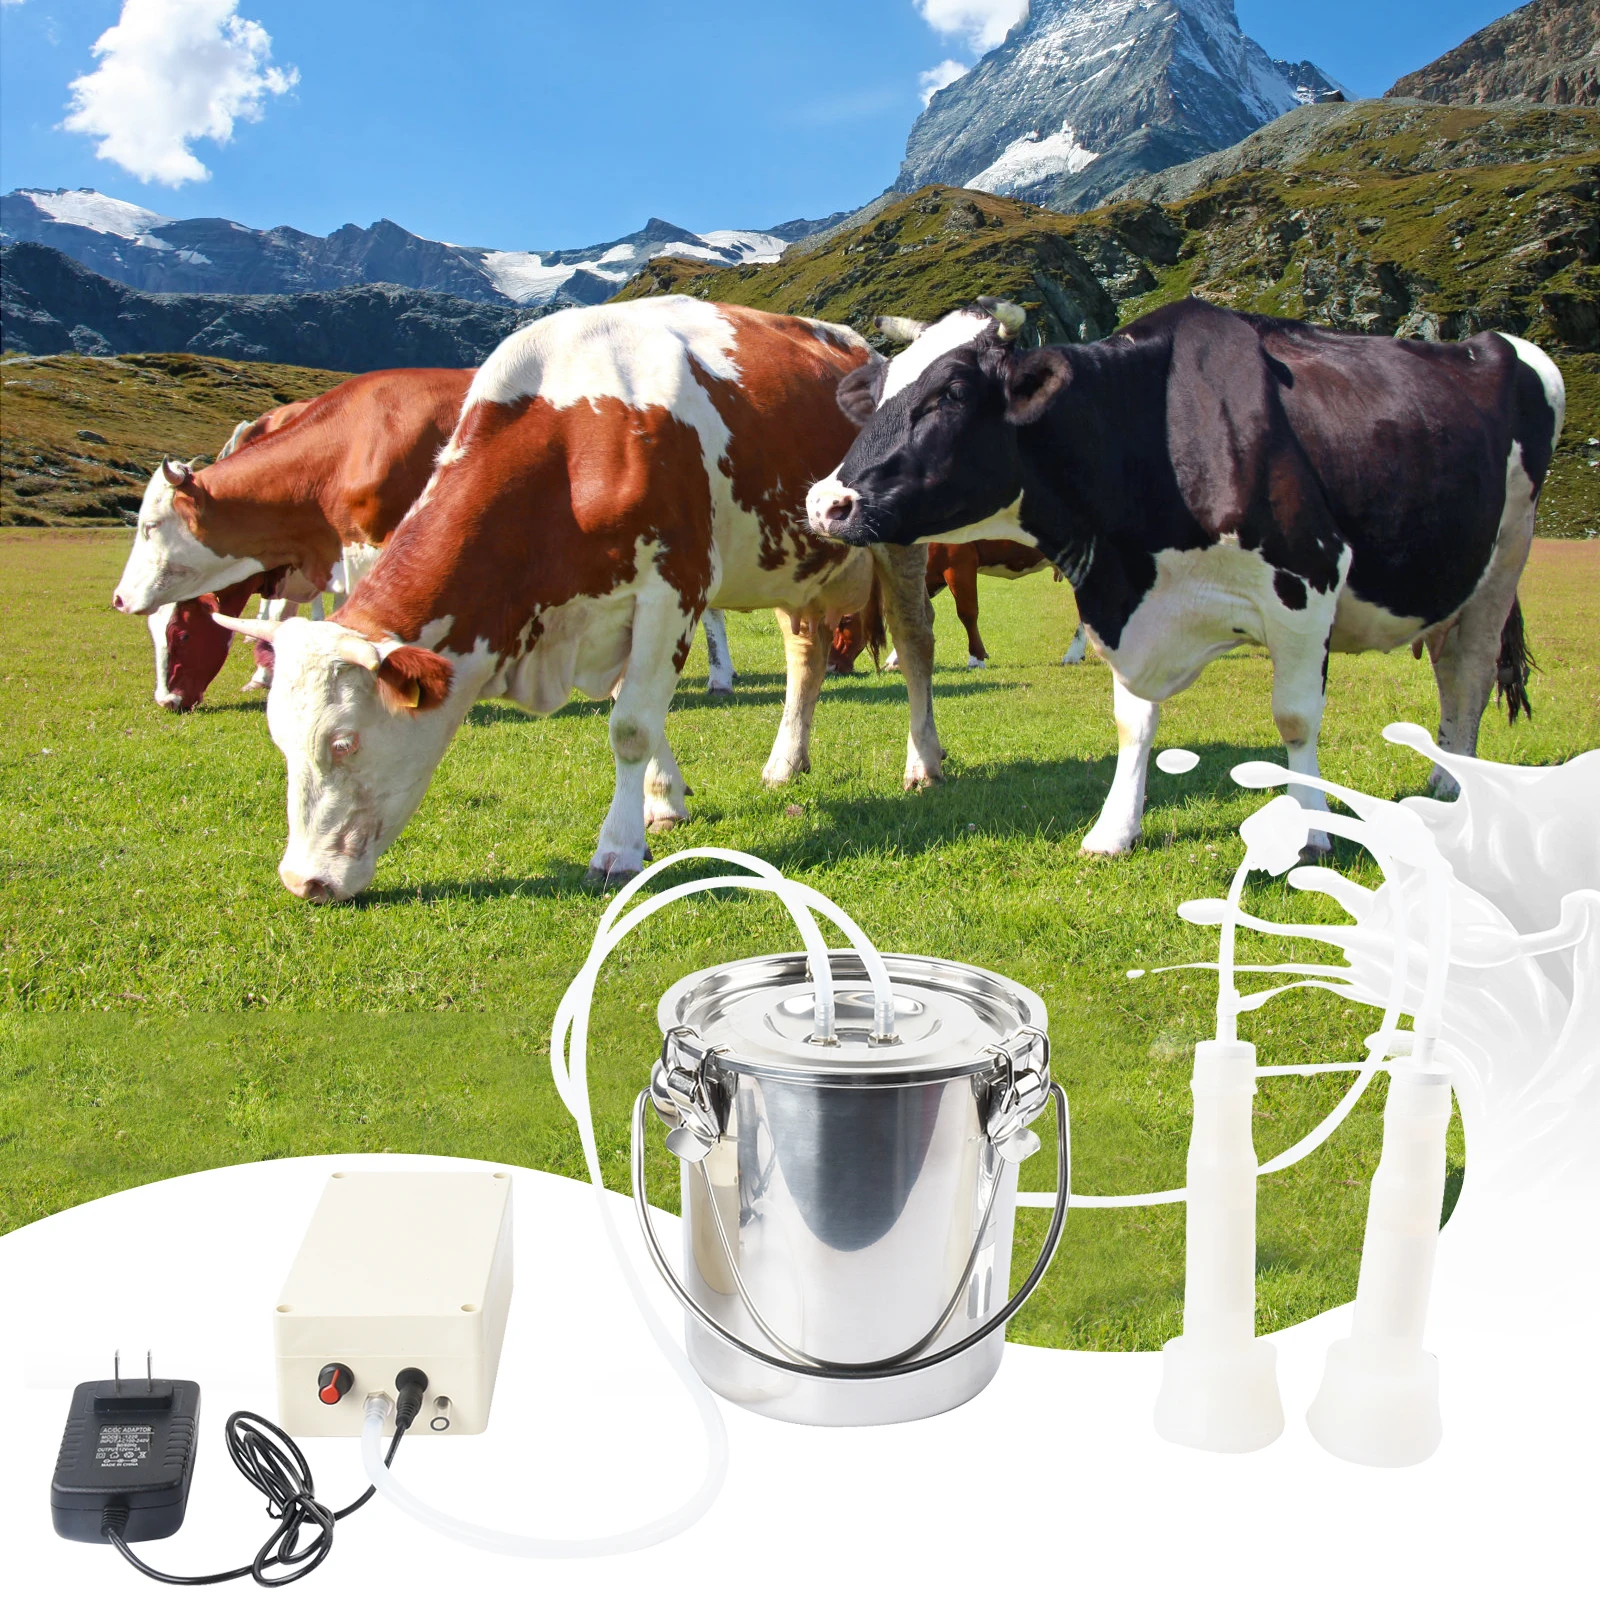 

3L Electric Milking Machine Stainless Steel Milker Farm Cow Goat Vacuum Suction Pump Bucket Automatic Cattle Milking Equipment